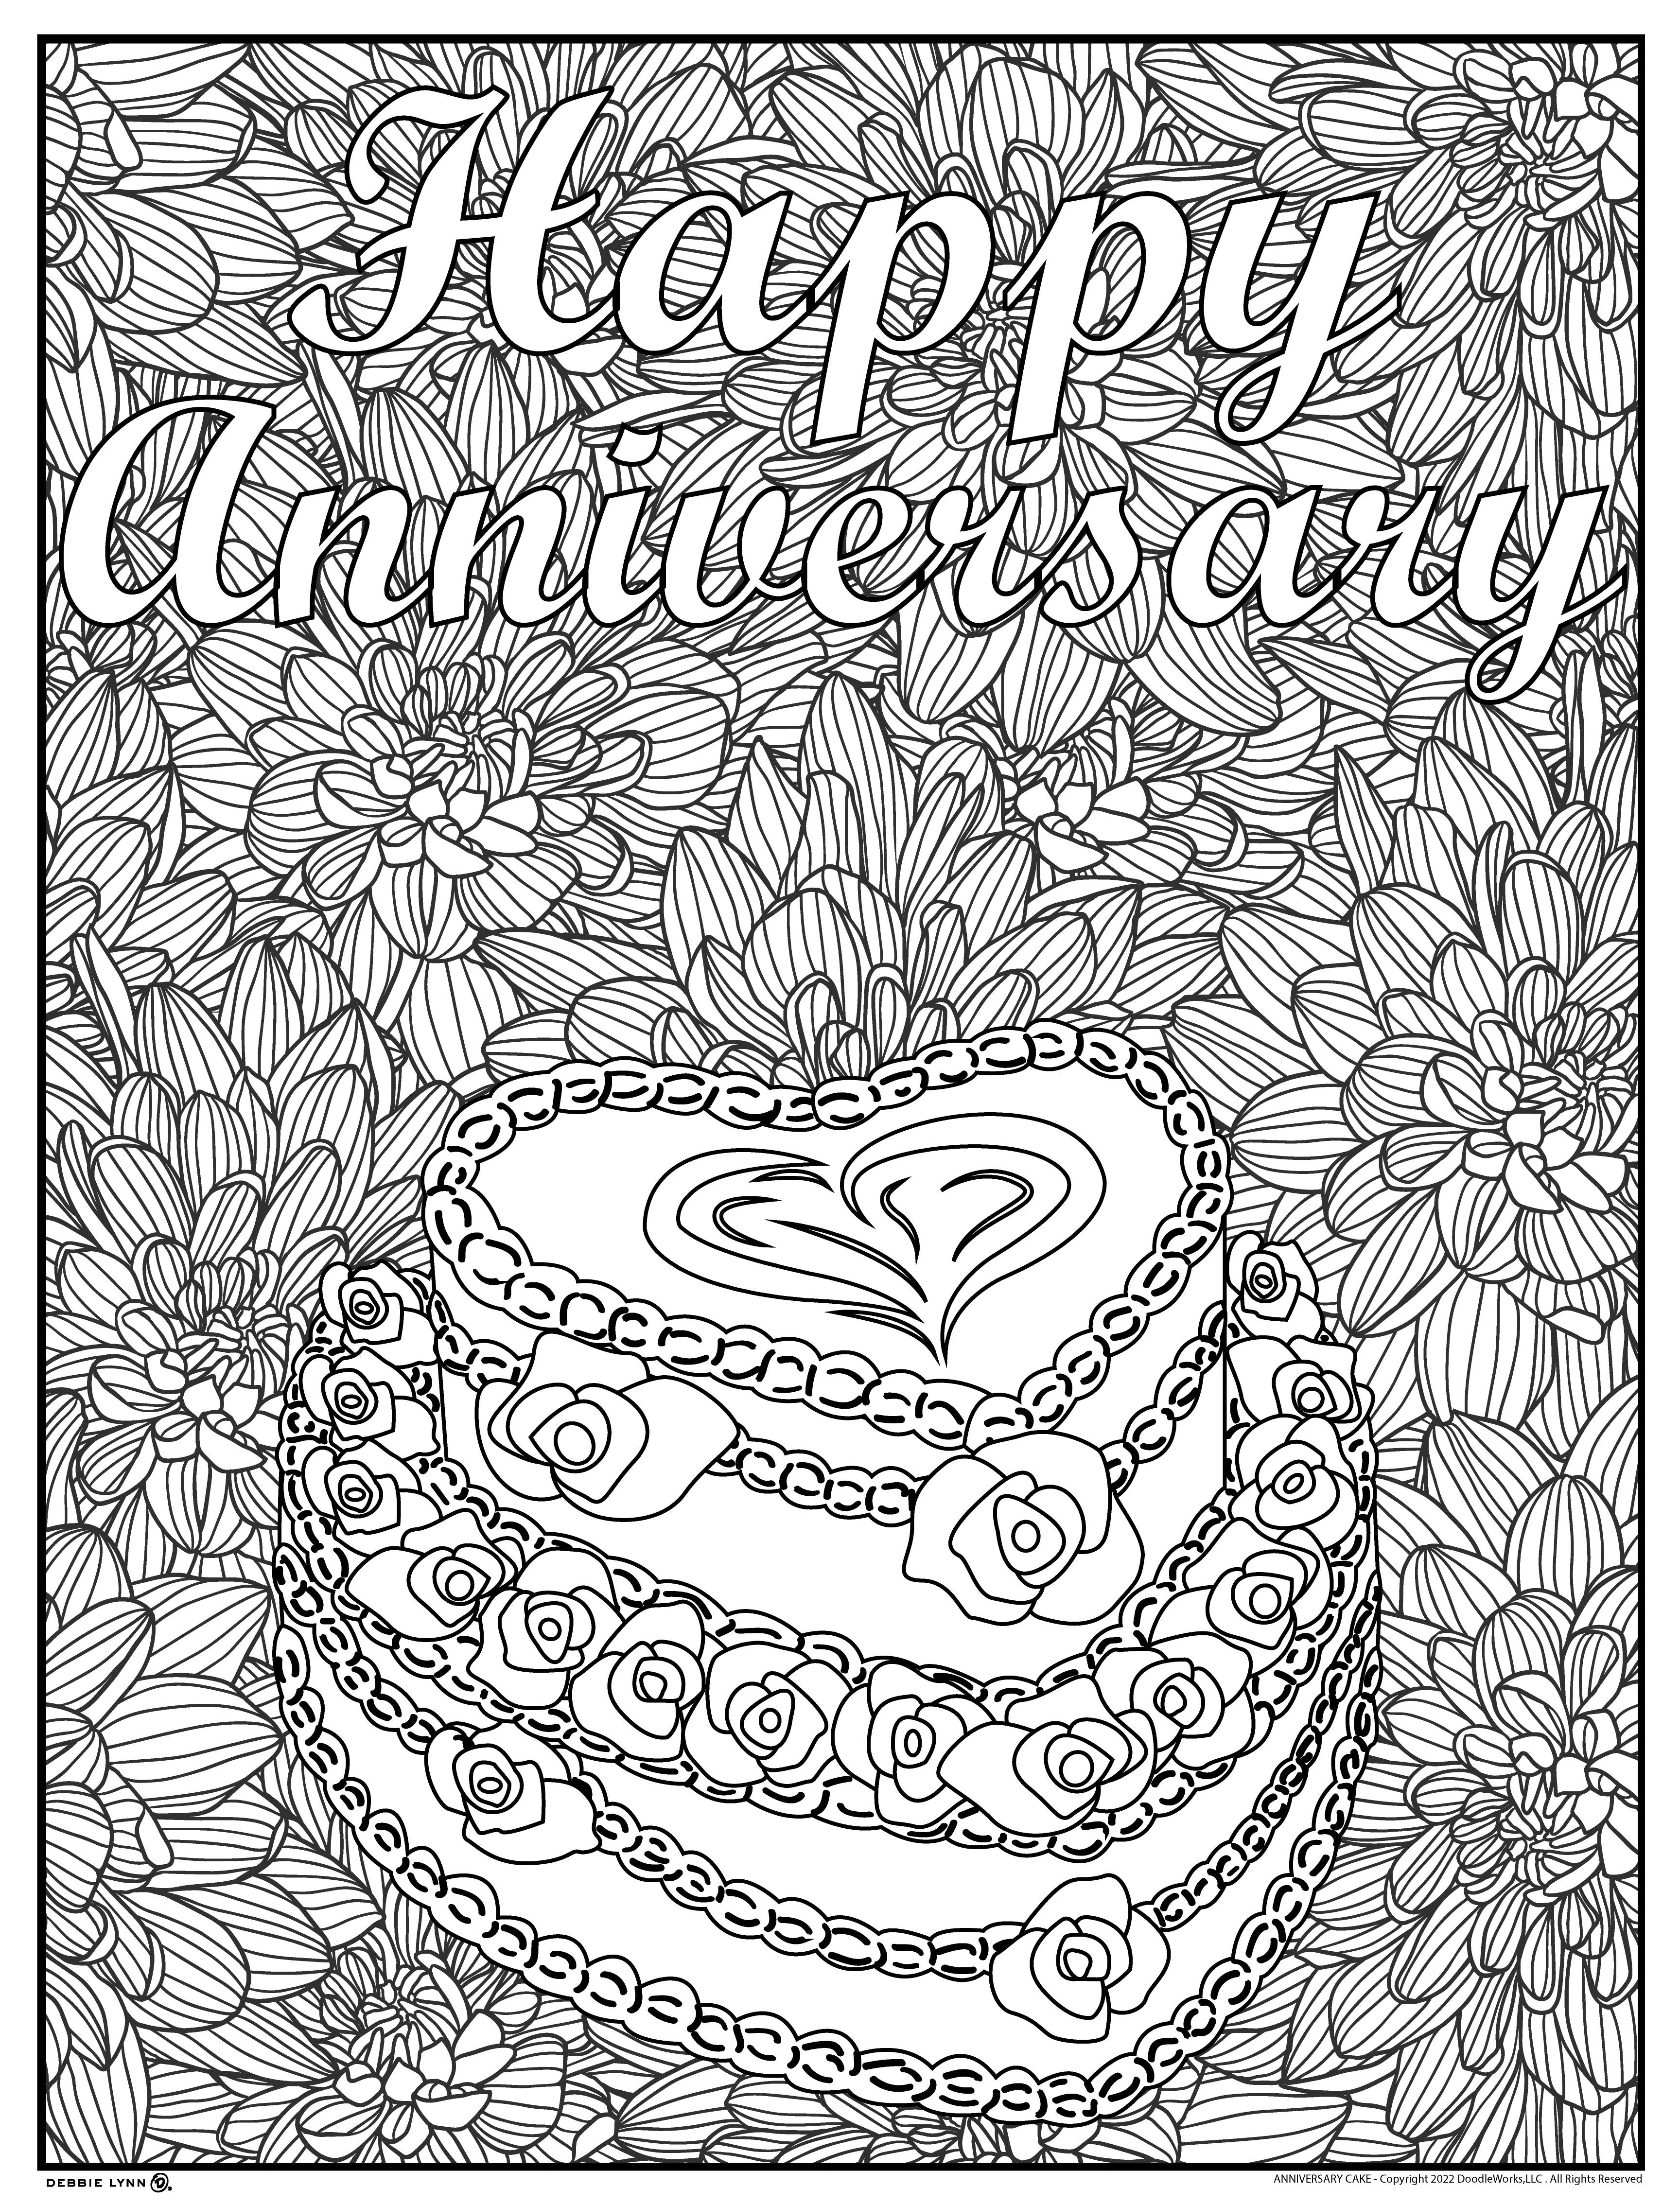 Anniversary cake personalized giant coloring poster x â debbie lynn